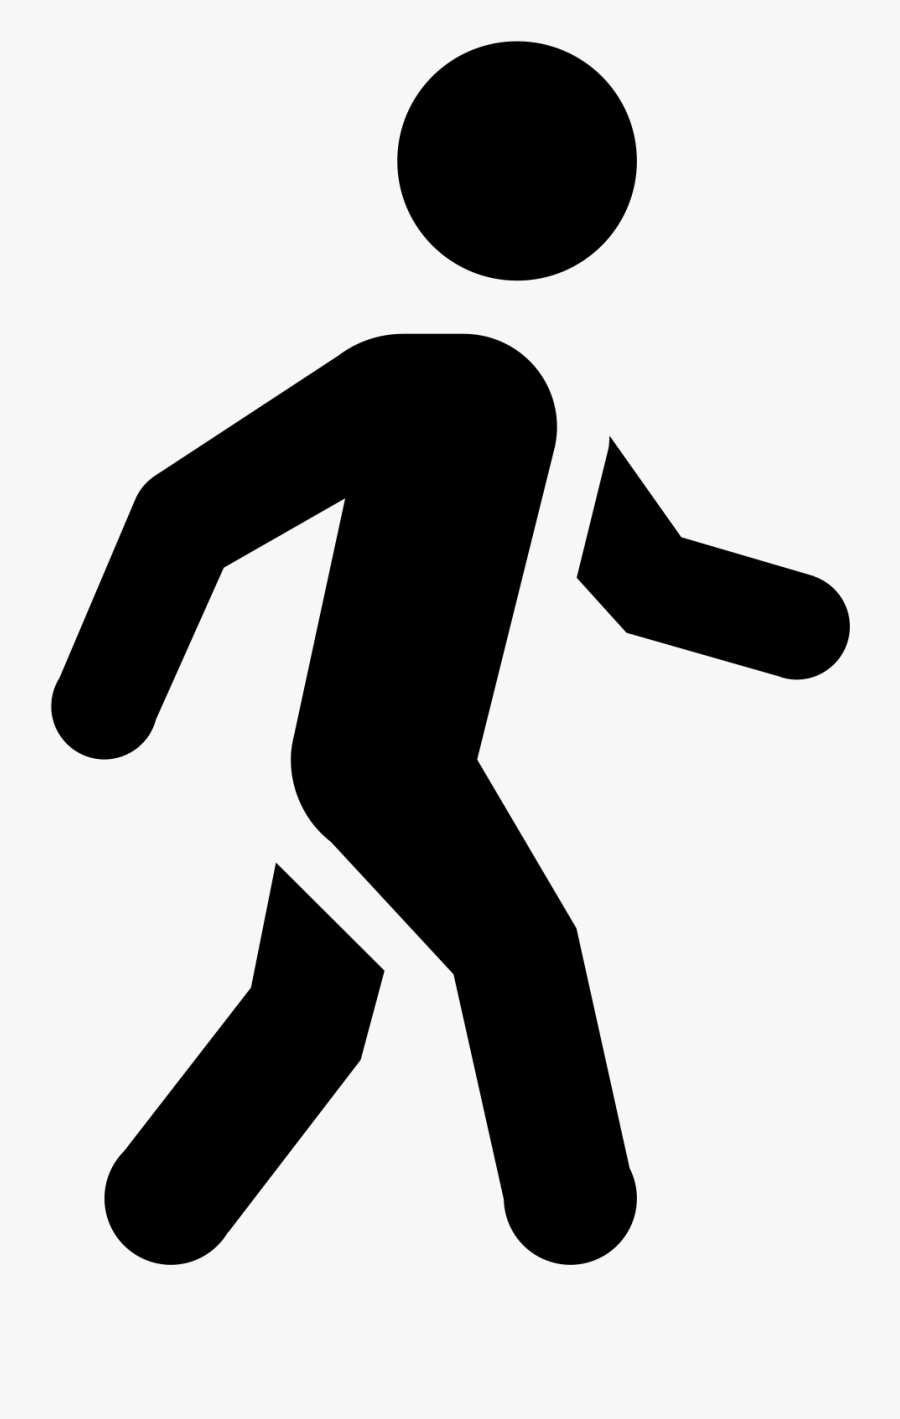 Walking Away Silhouette Png - Walking Icon, Transparent Clipart